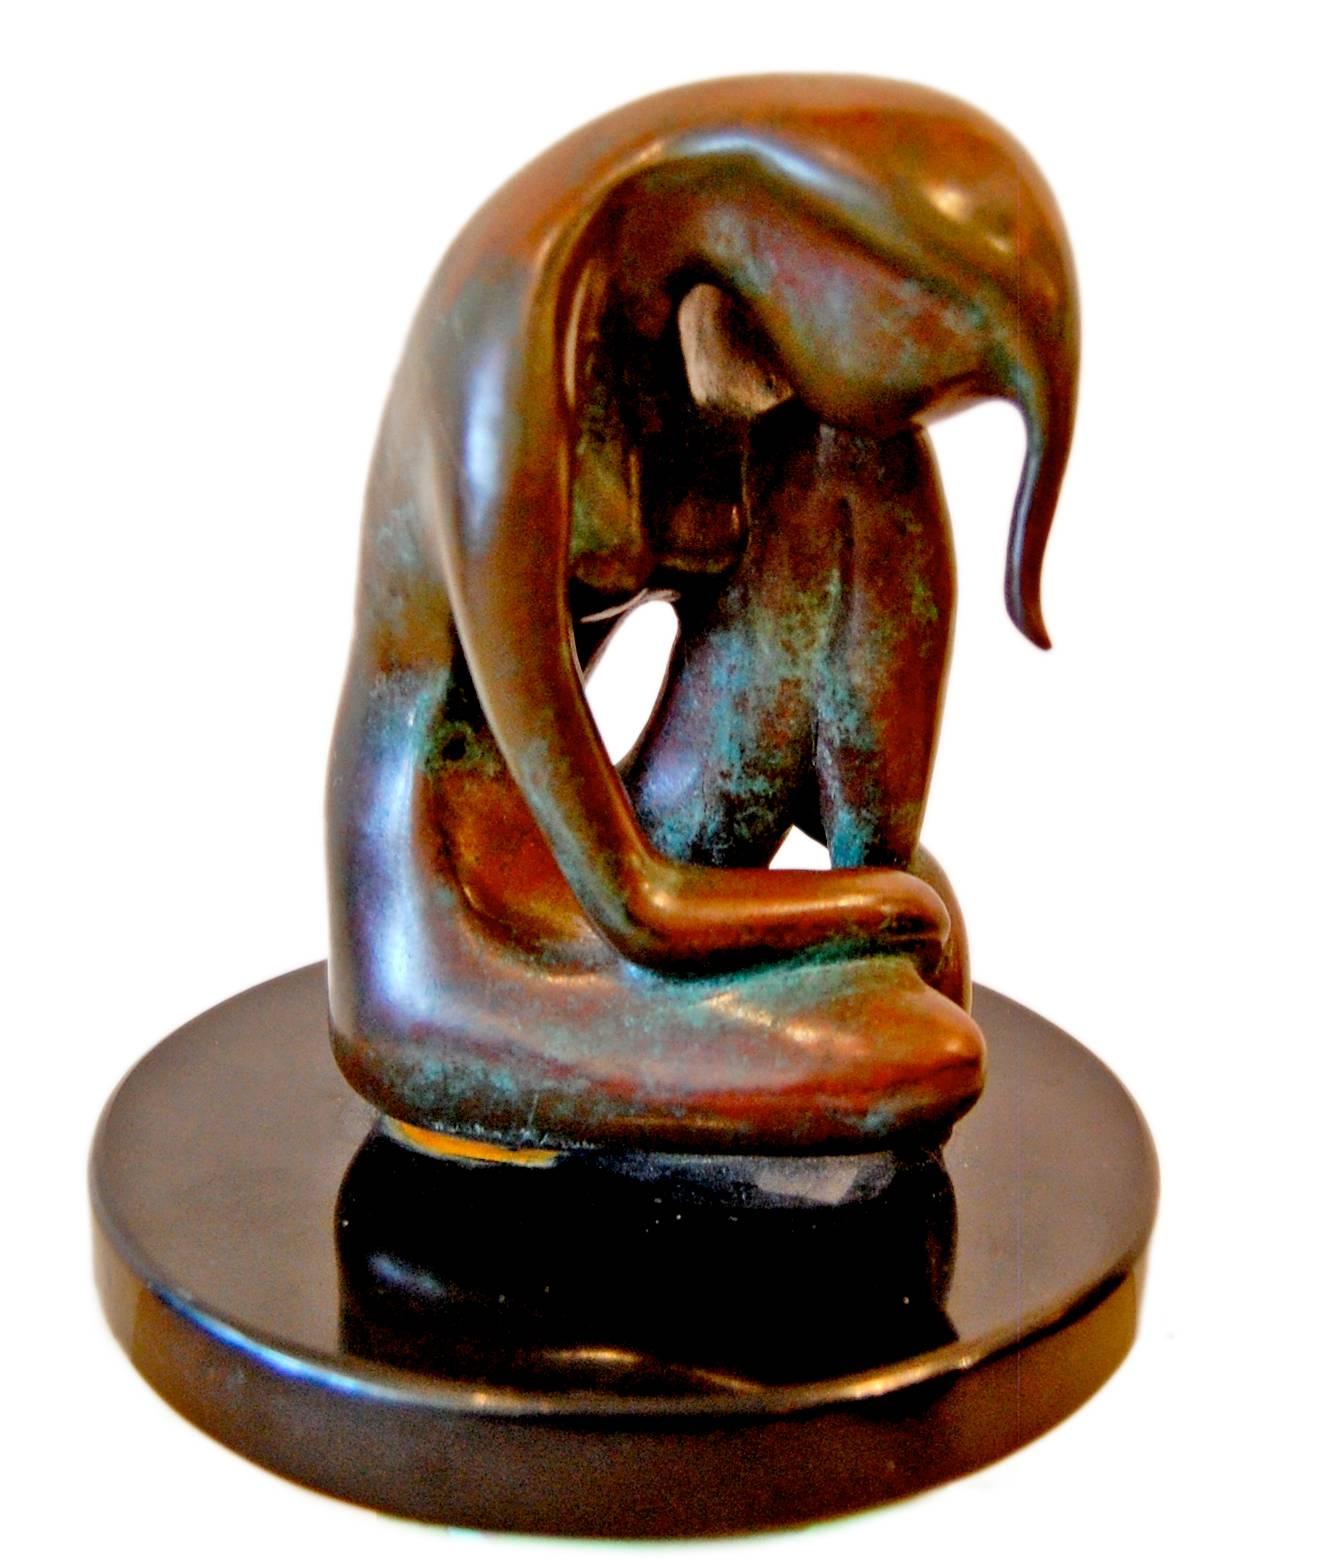 Unknown Nude Sculpture - signed Frantzke; TWO nude sculptures stamped with “W.A.R 2/100”; bronze